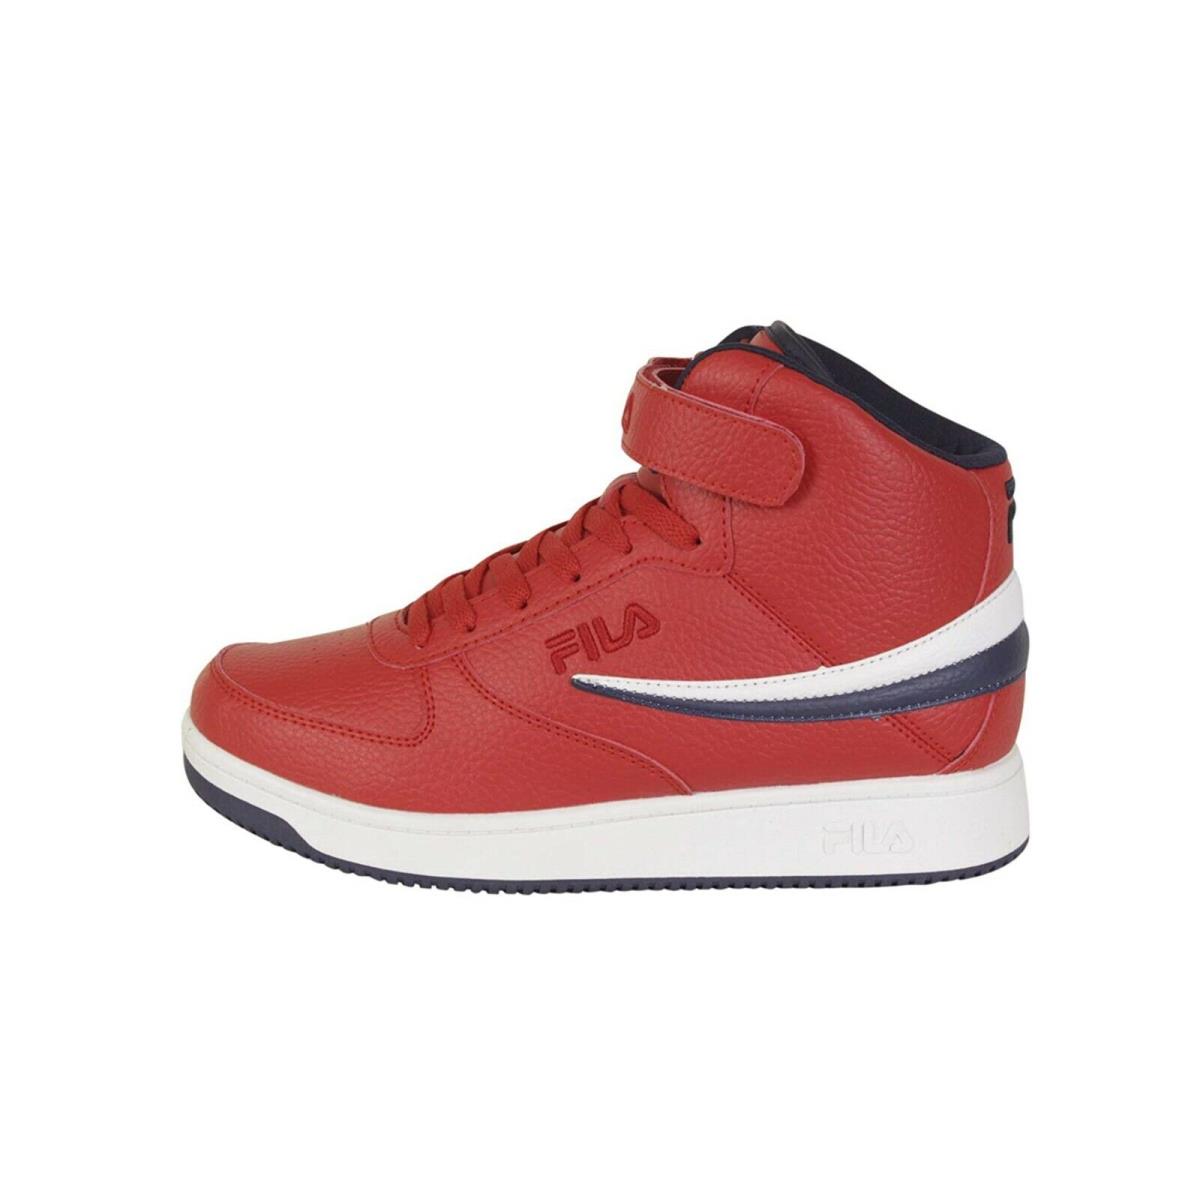 Fila Men A-high Shoes Synthetic Leather Red White High Top Sneakers - Red